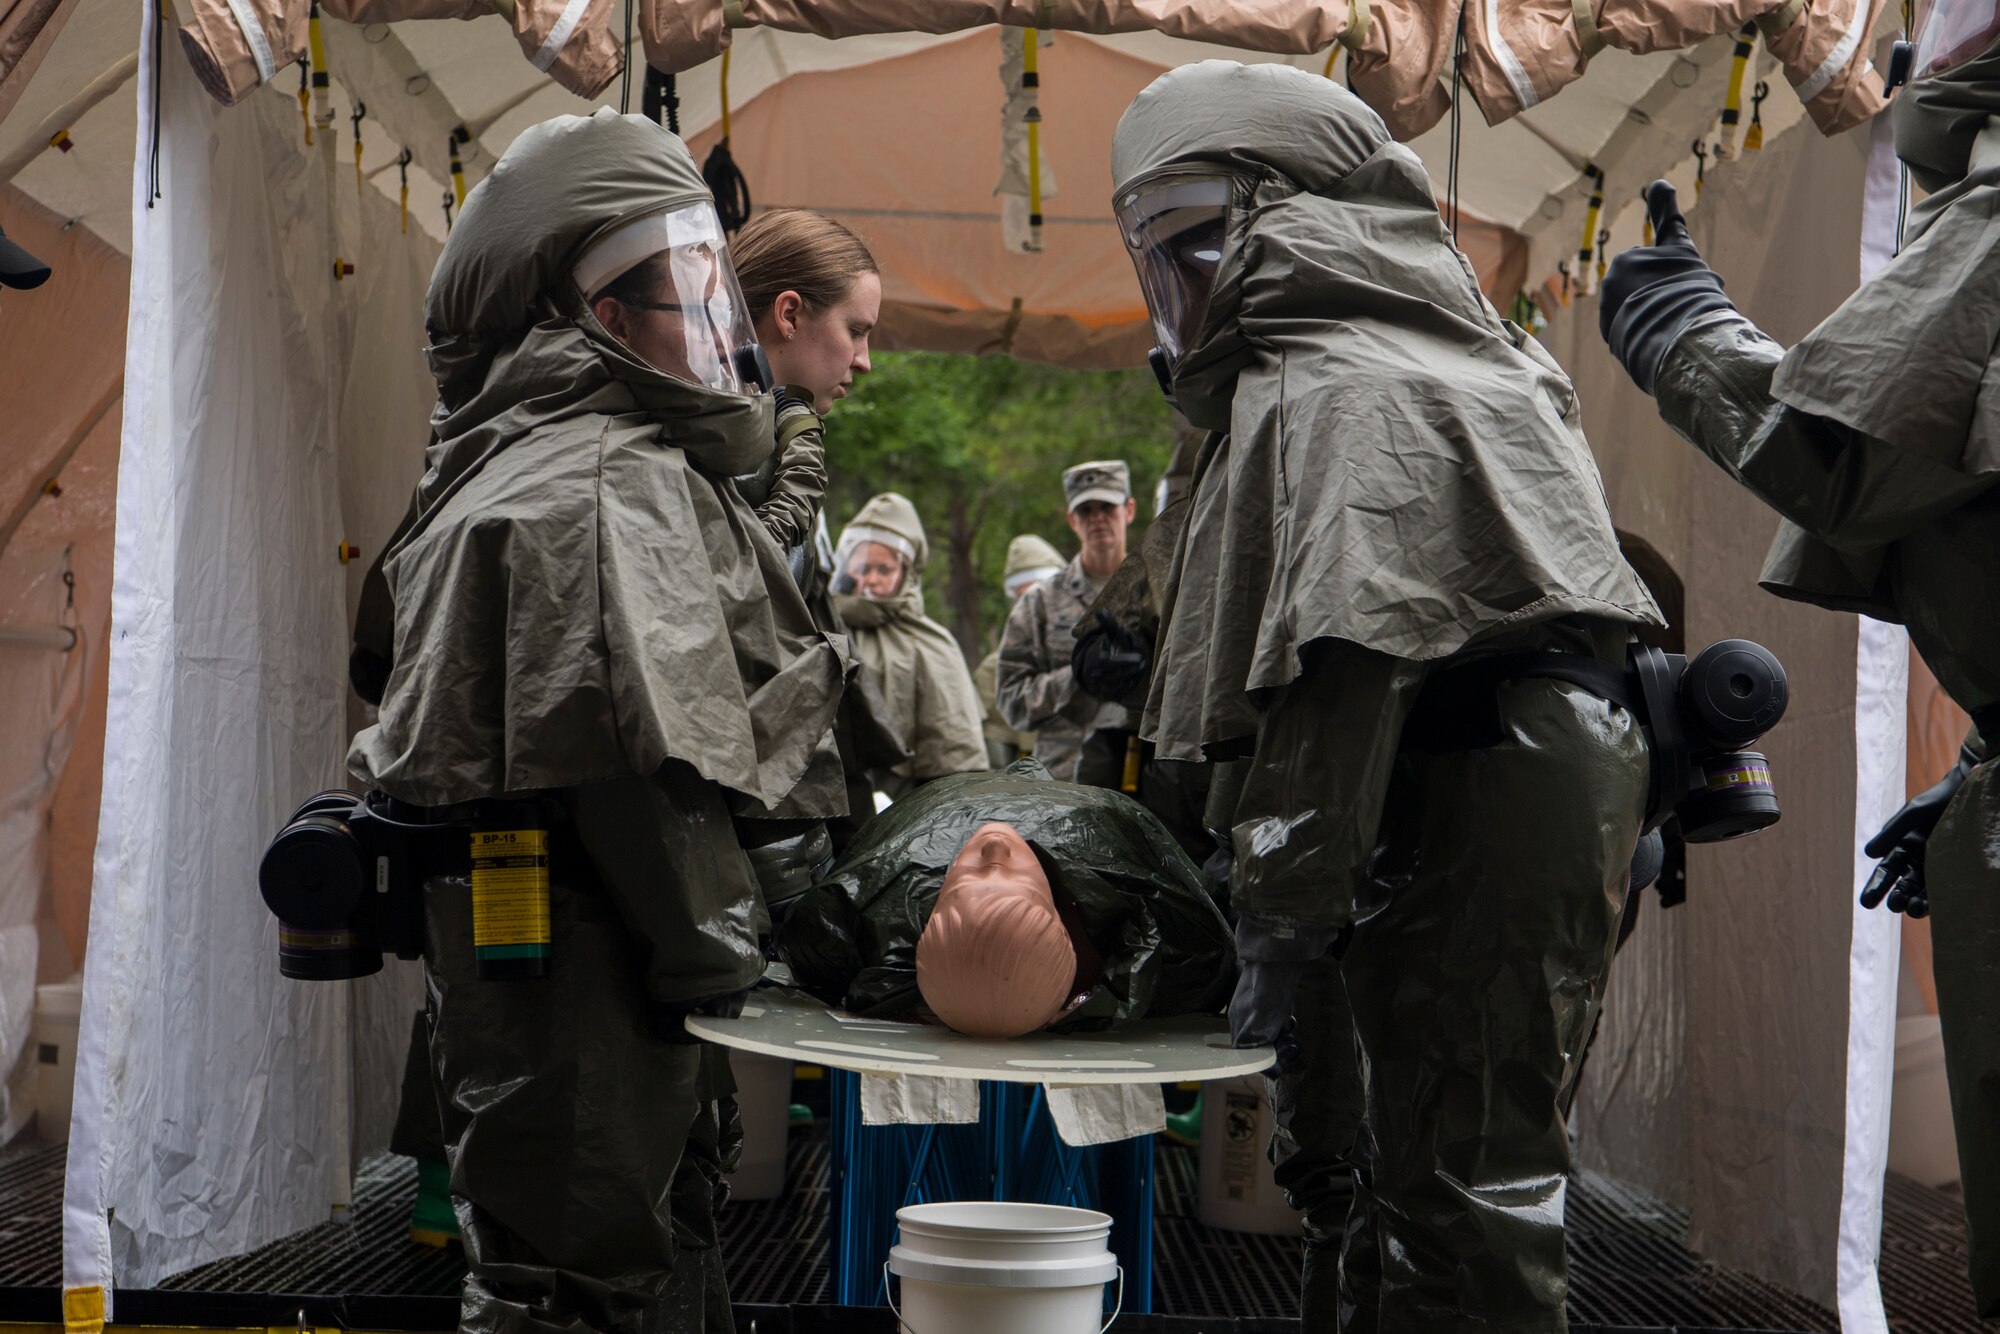 Airmen from the 628th Medical Group prepare to move a simulated casualty during an exercise May 9, 2019, at Joint Base Charleston, S.C. The 628th MDG conducted a joint certification course, including an intensive patient decontamination exercise, to prepare Air Force medical responders to save lives, provide shelter and protect facilities in times of crisis. The exercise was conducted to train and prepare members of the 628th MDG and to maintain a first-response team ready to confront chemical related emergencies. (U.S. Air Force photo by Senior Airman Christian Sullivan)